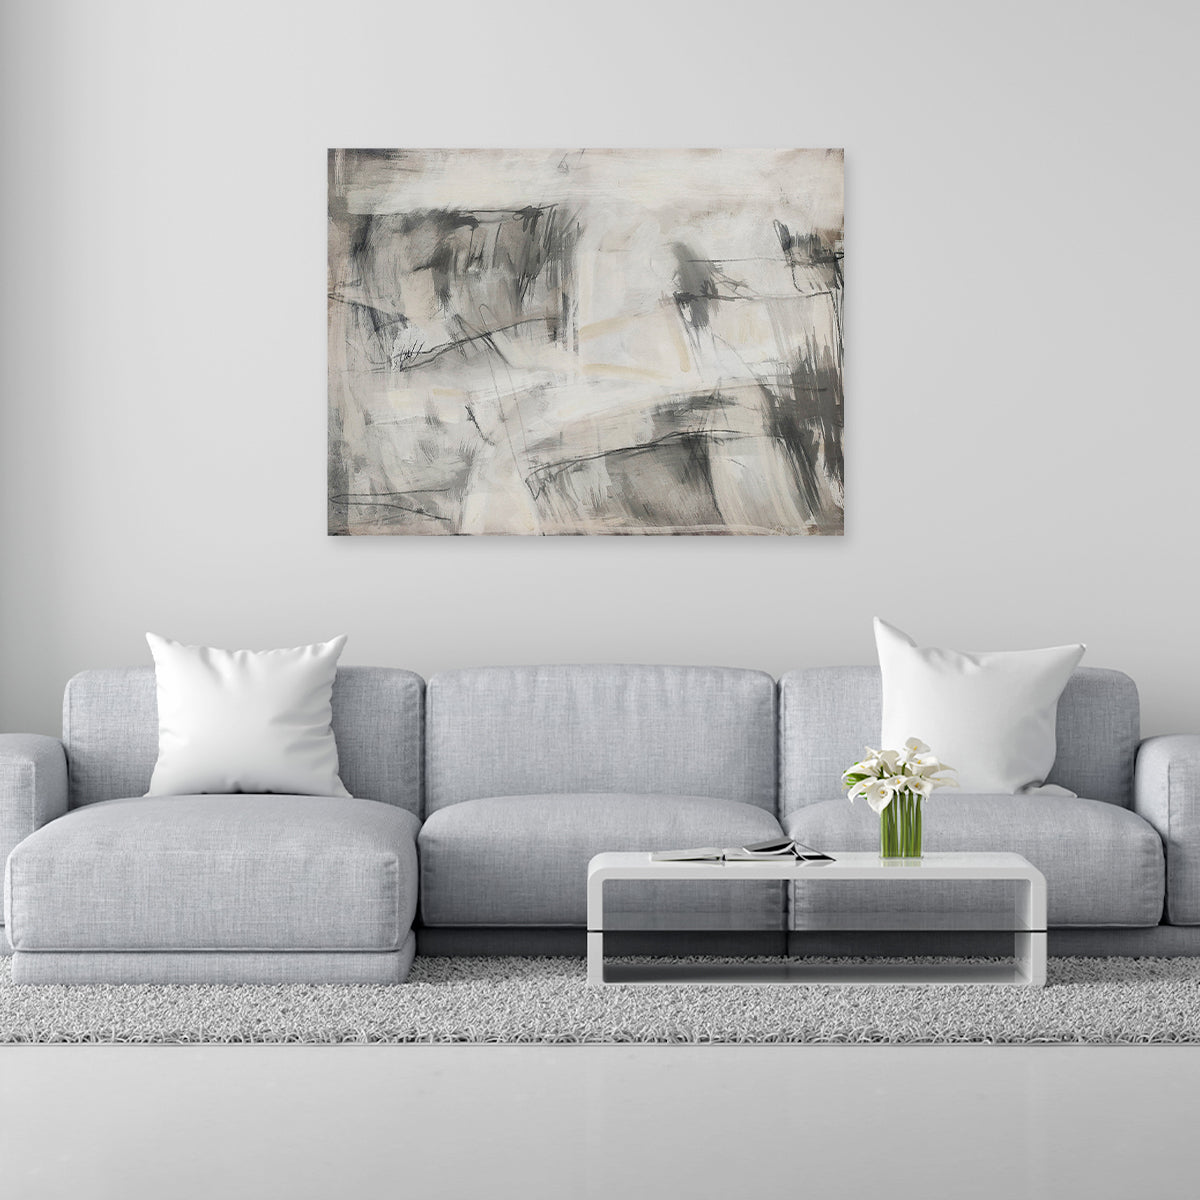 Abstract textured wall art affordable oil painting unframed grey landscape in living room